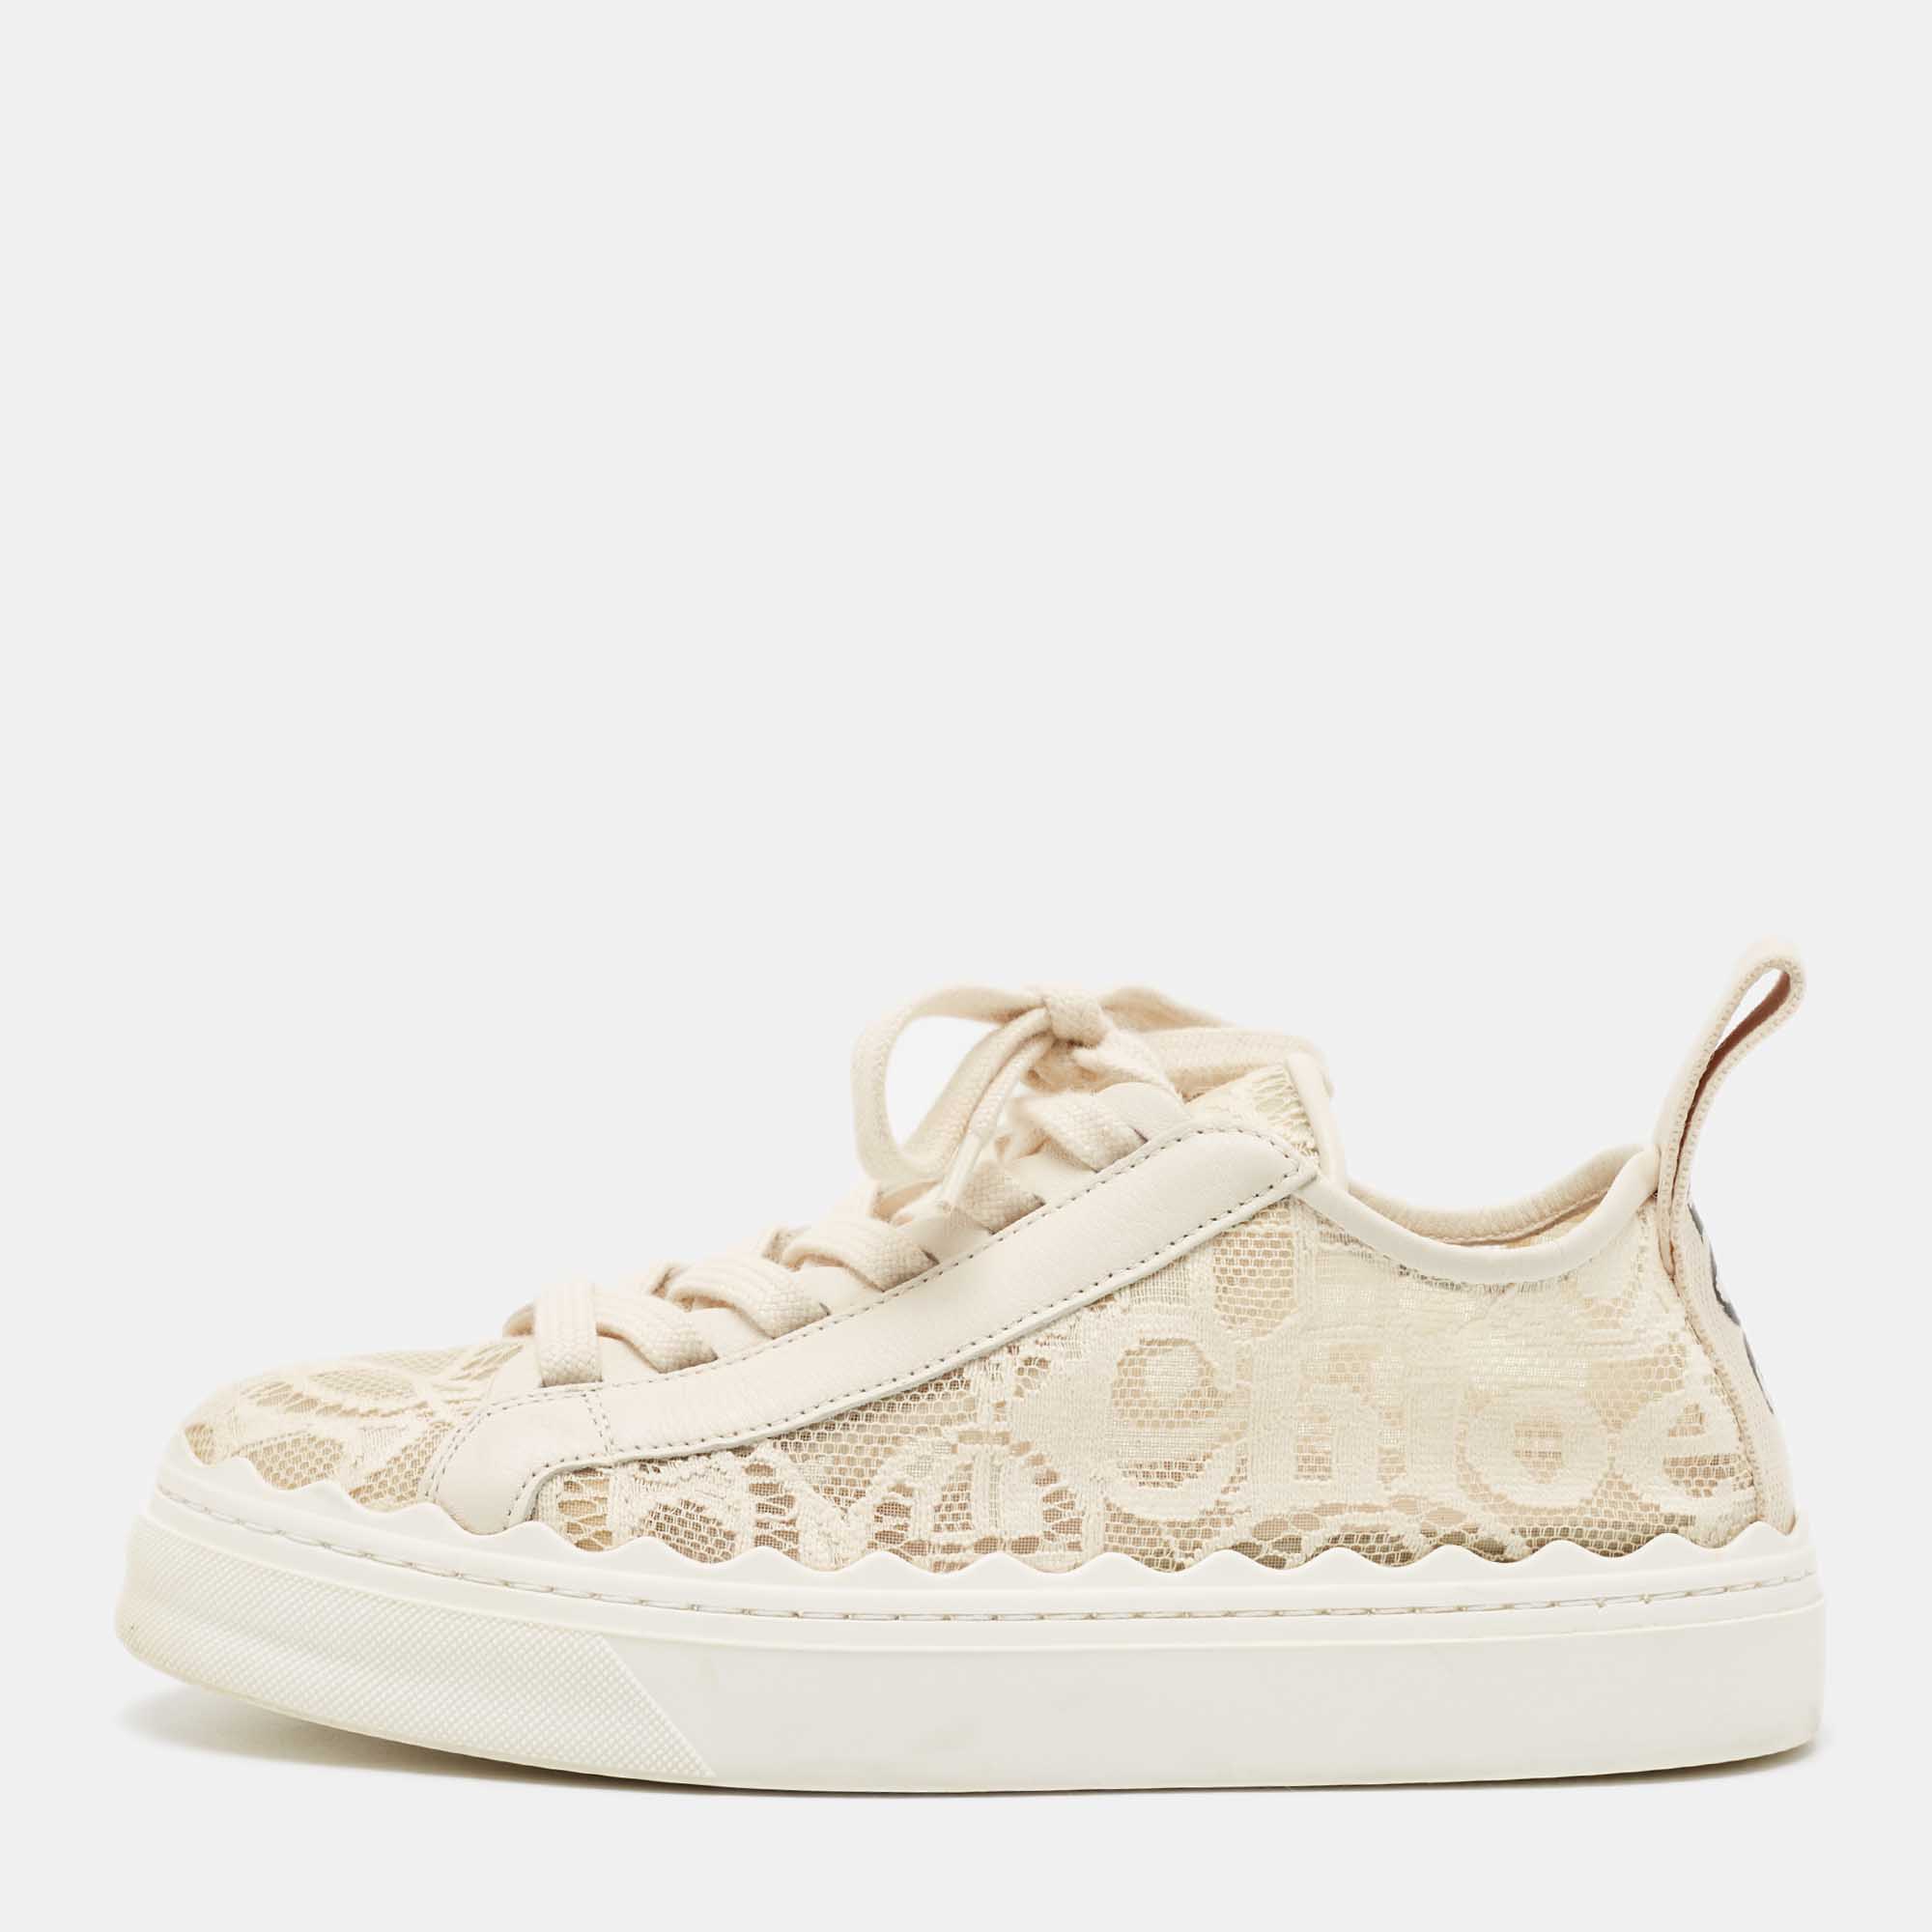 Chloe Light Cream Lace And Leather Lauren Low Top Sneakers Size 36